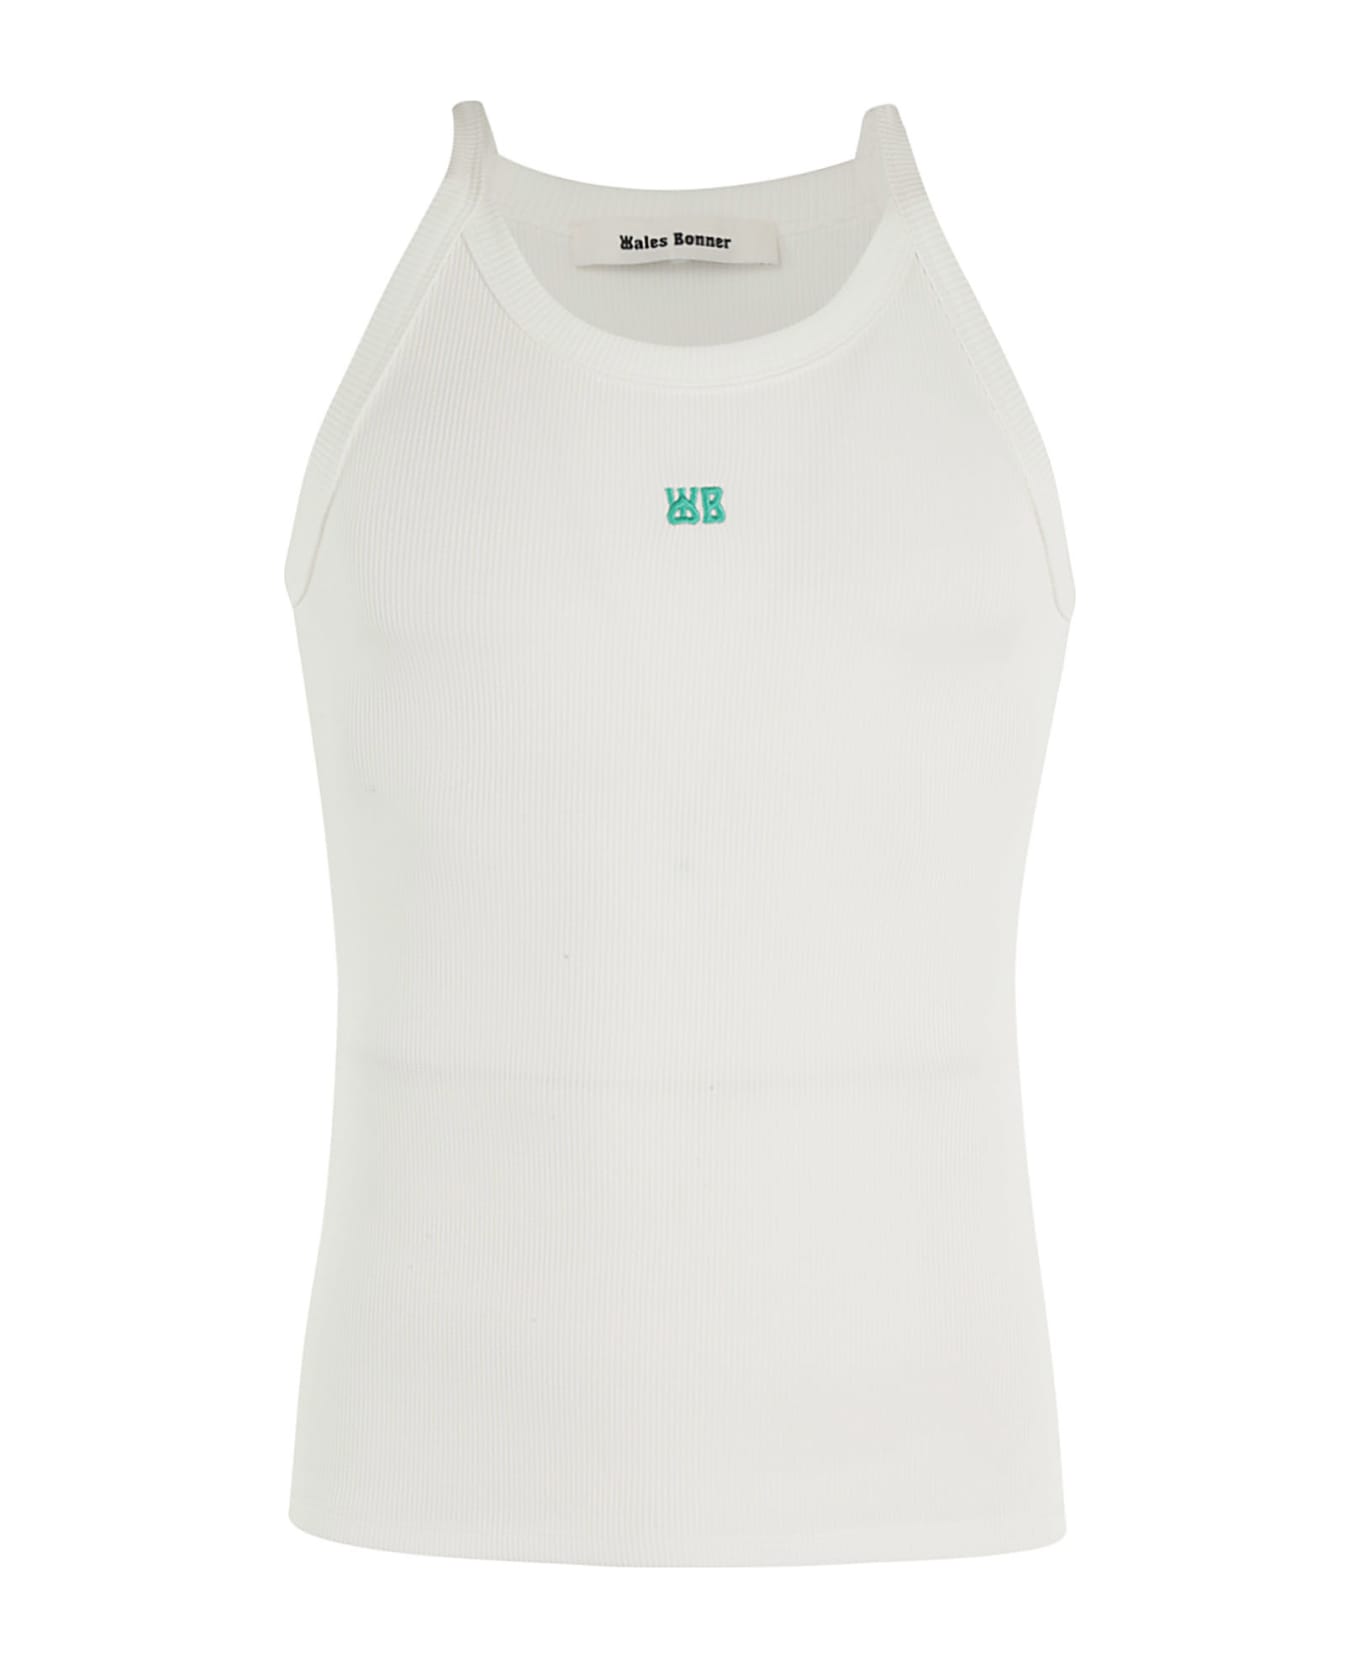 Wales Bonner Groove Tank - Ivory